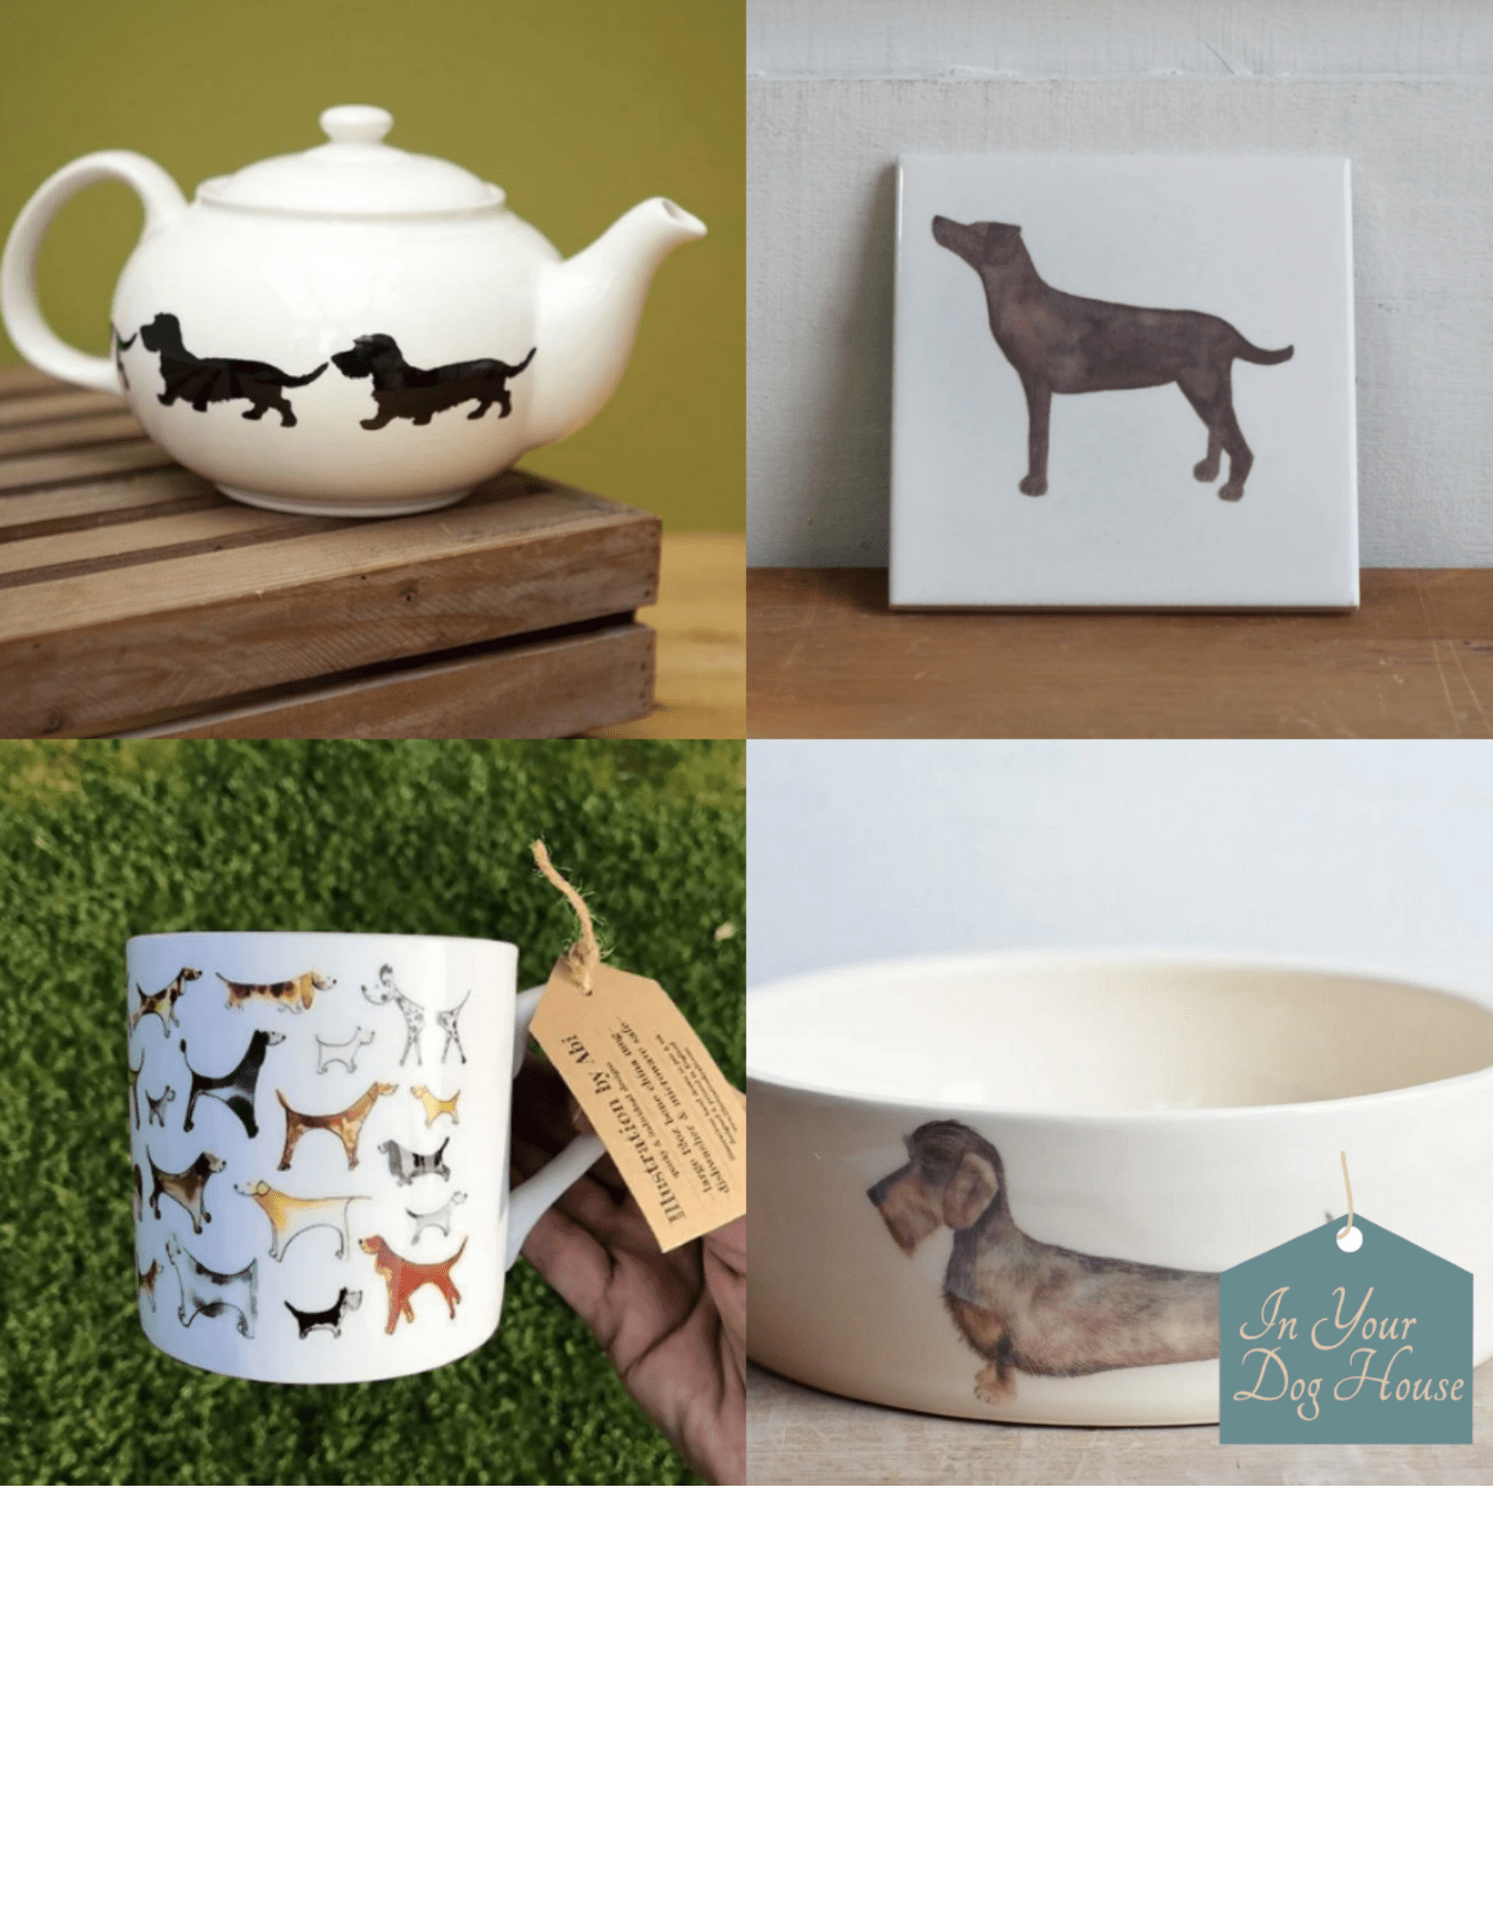 Fantastic Gifts for Pet Owners & Their Furry Friends